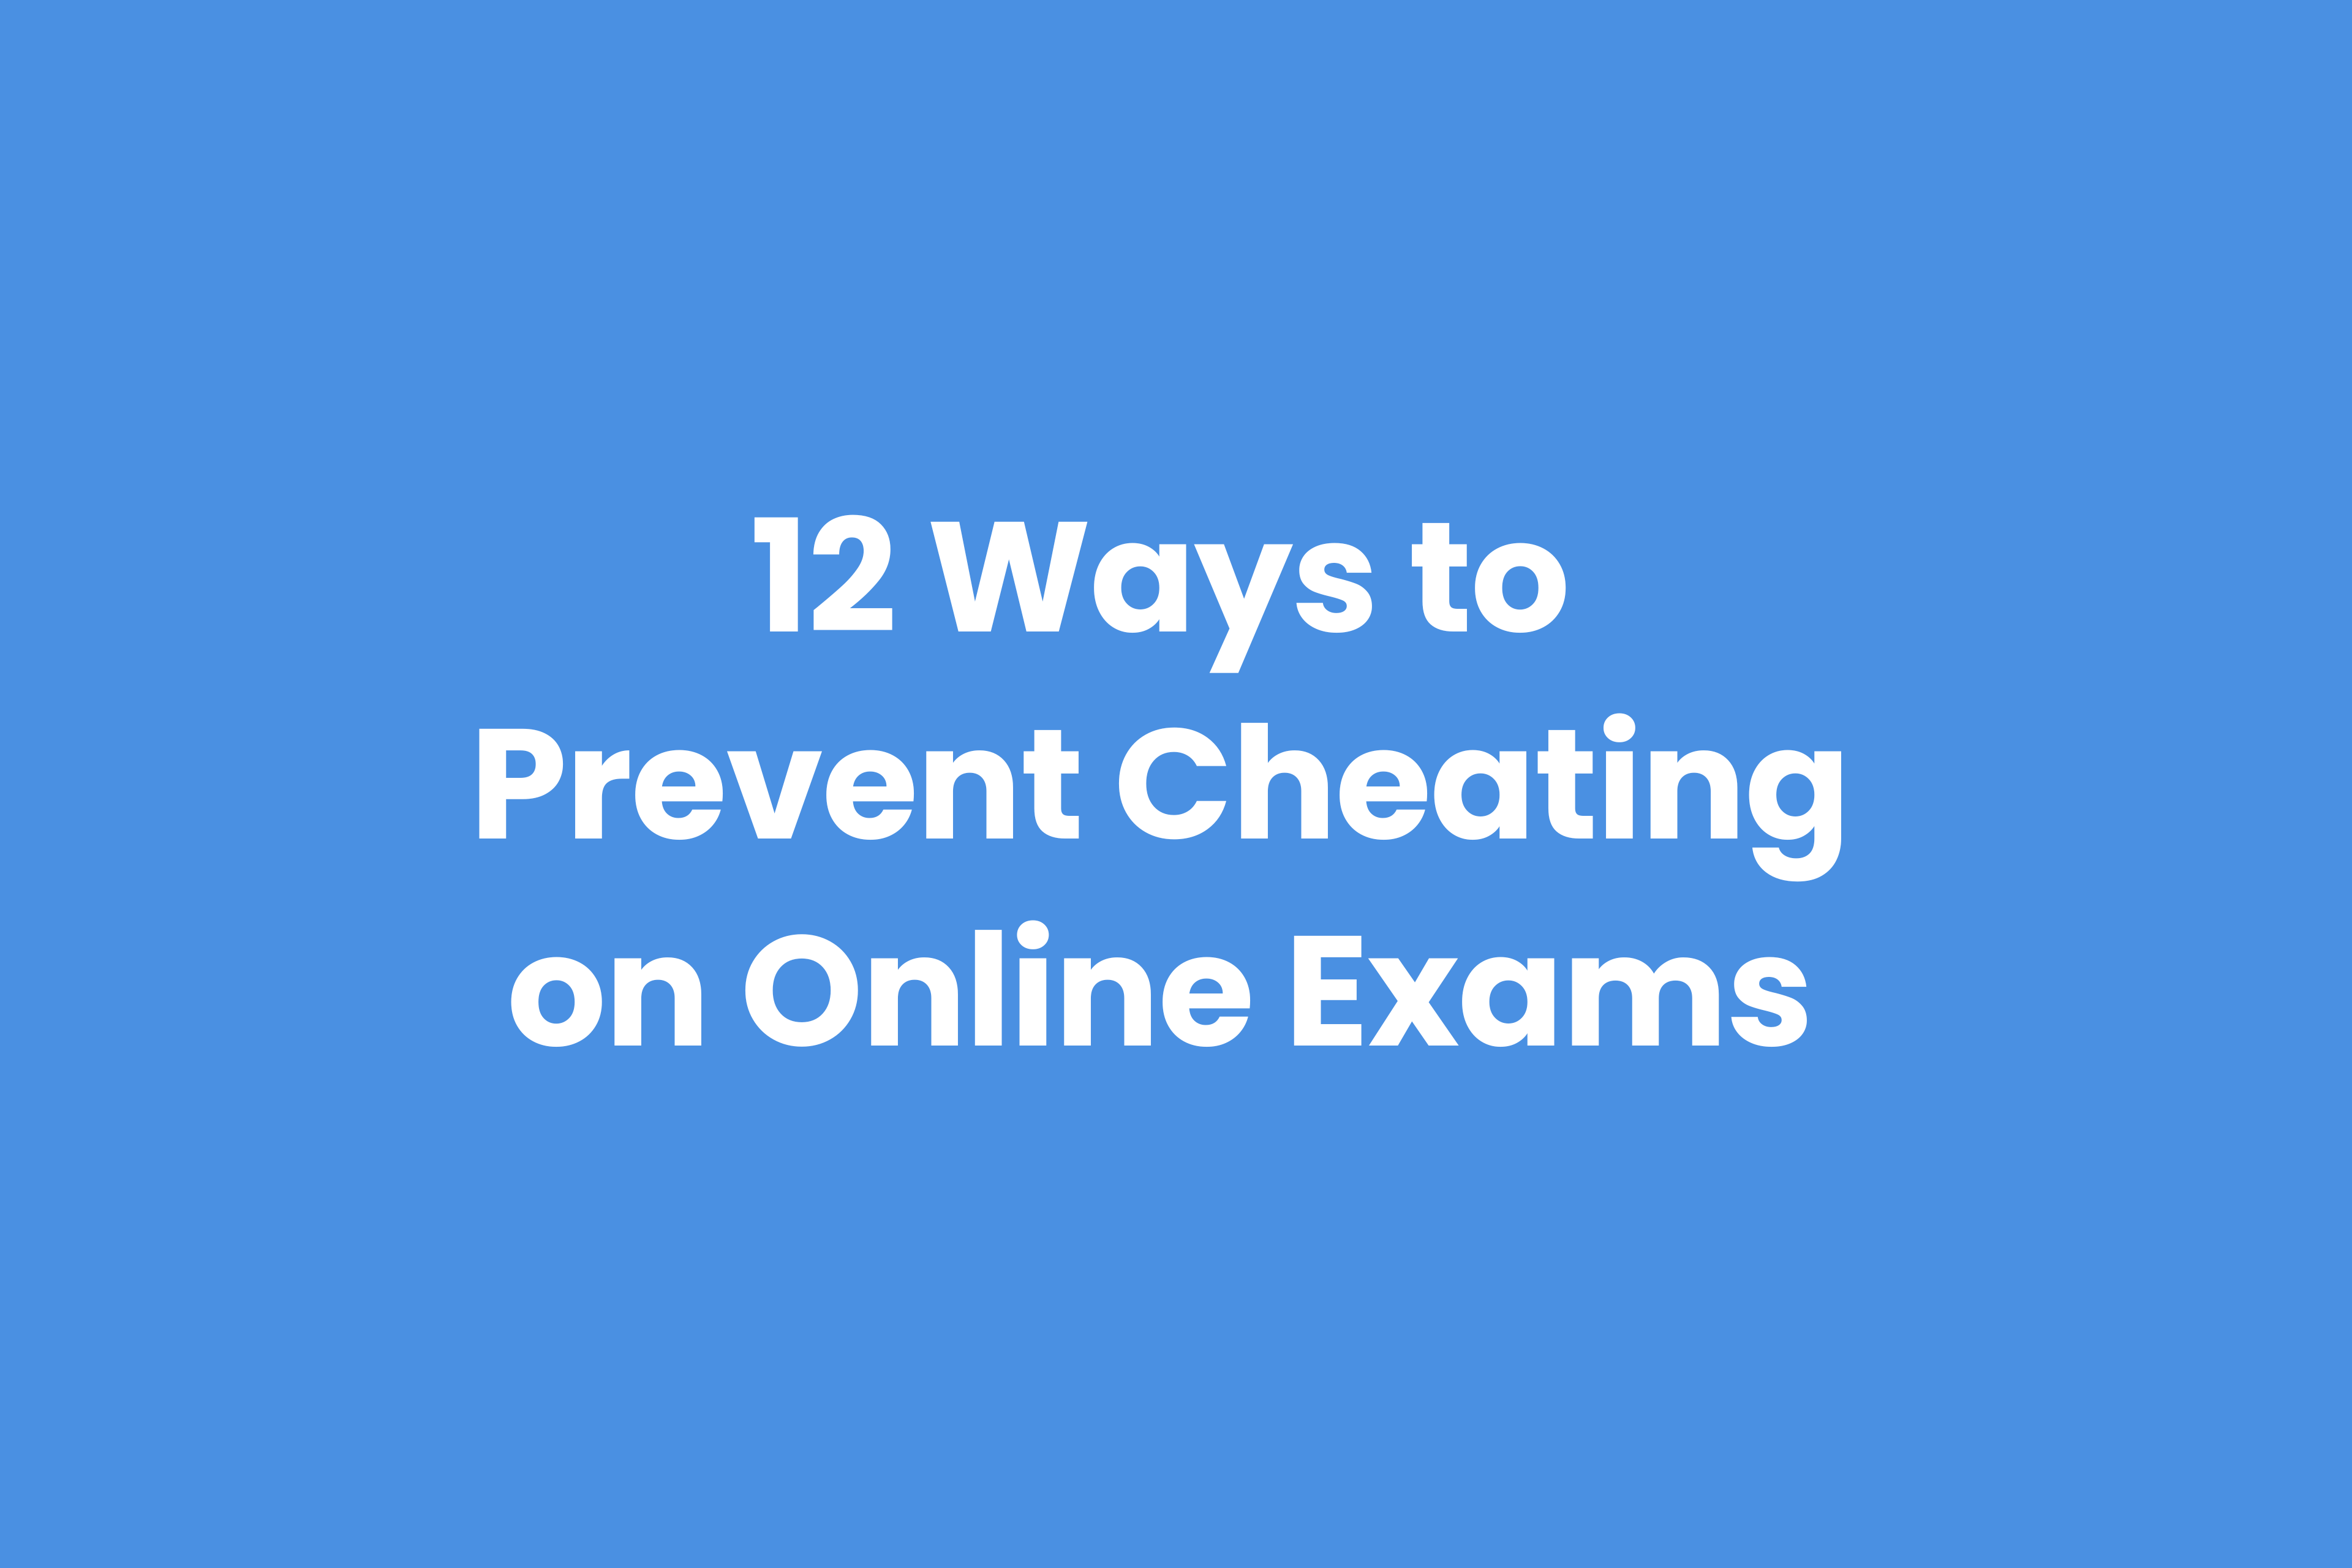 How to stop cheating on online exams